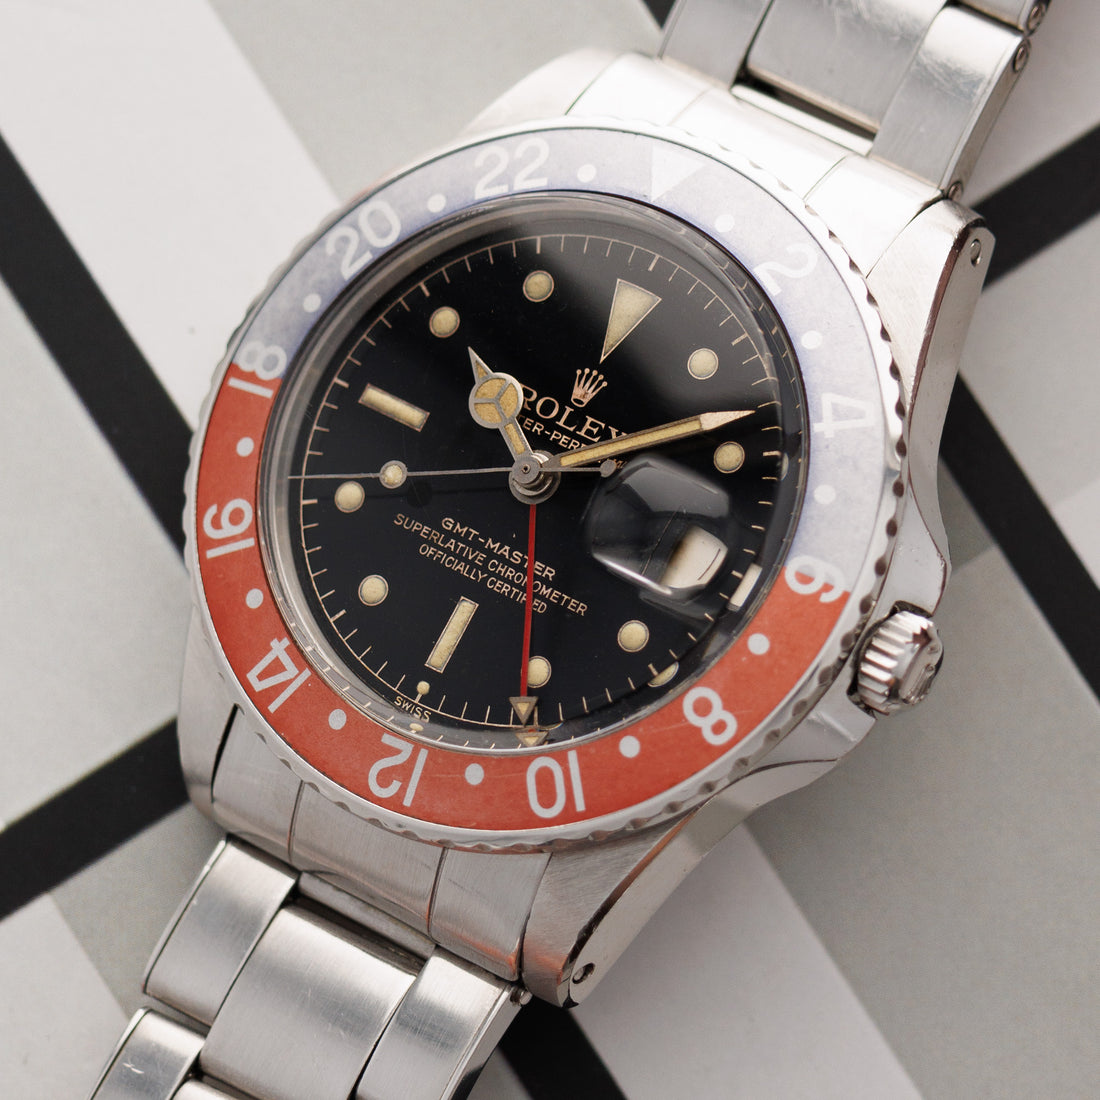 Rolex Steel GMT Master Ref. 1675 with Gilt Chapter Ring Dial